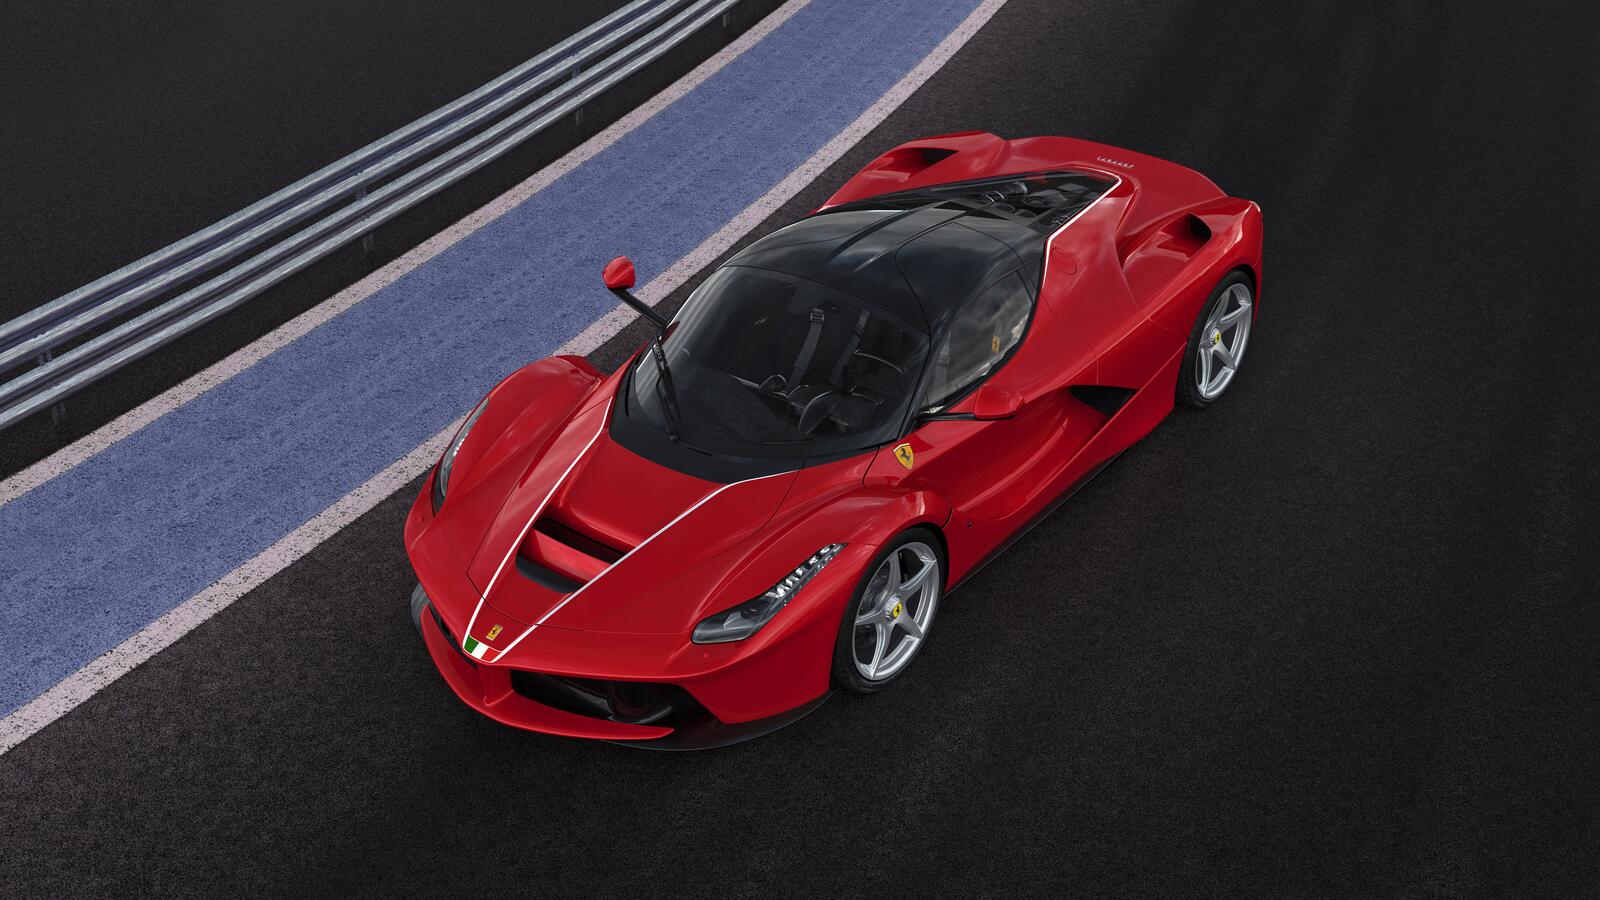 Wallpapers Ferrari speed view from the top on the desktop